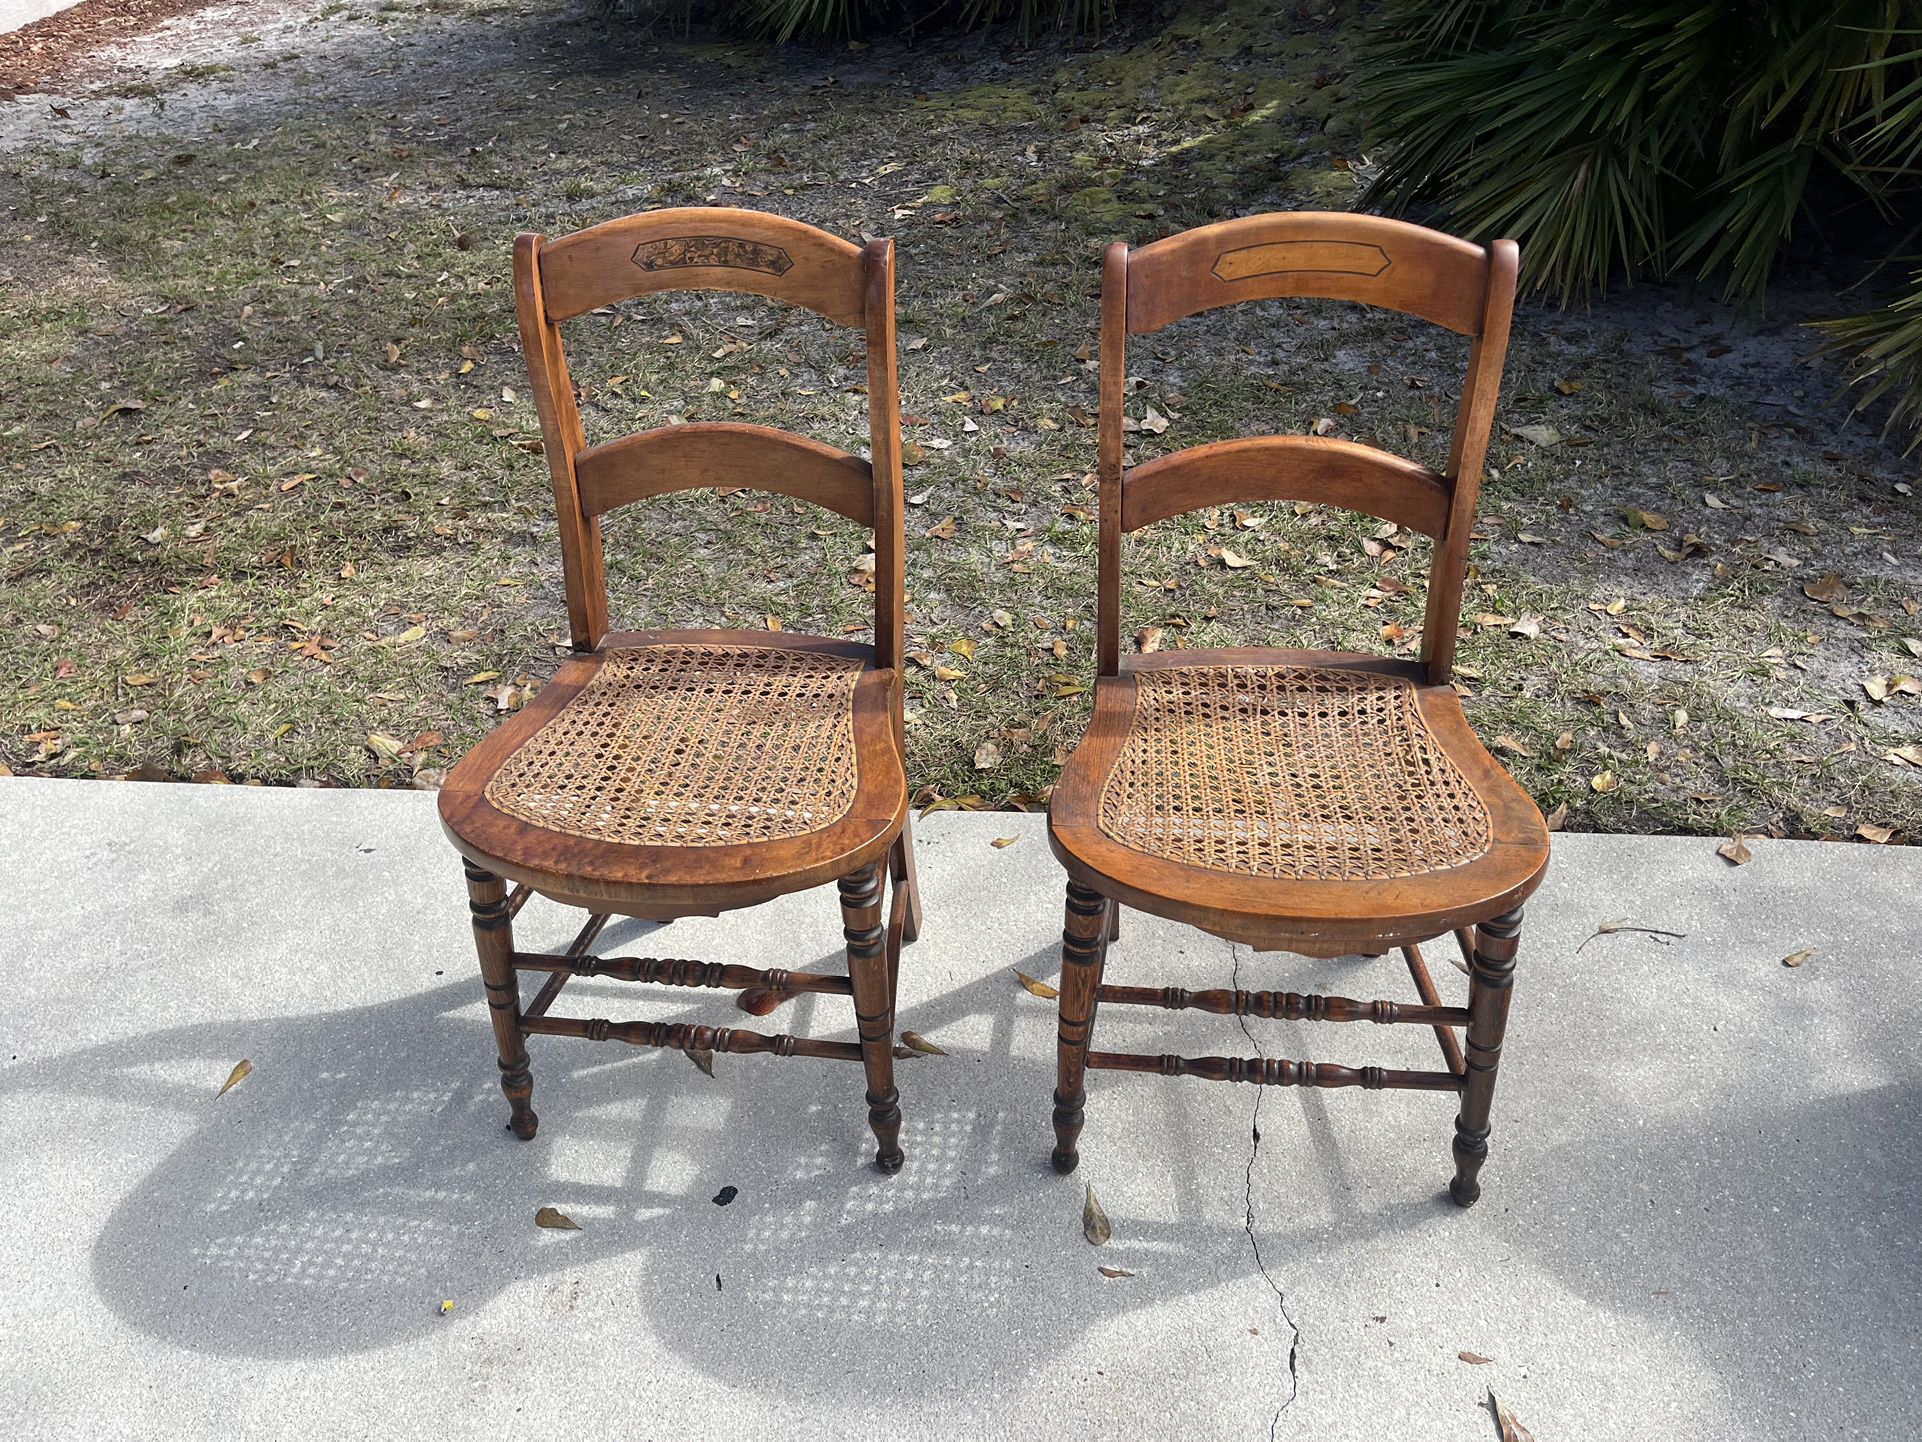 Vintage Cane ladder back chairs 1(contact info removed)